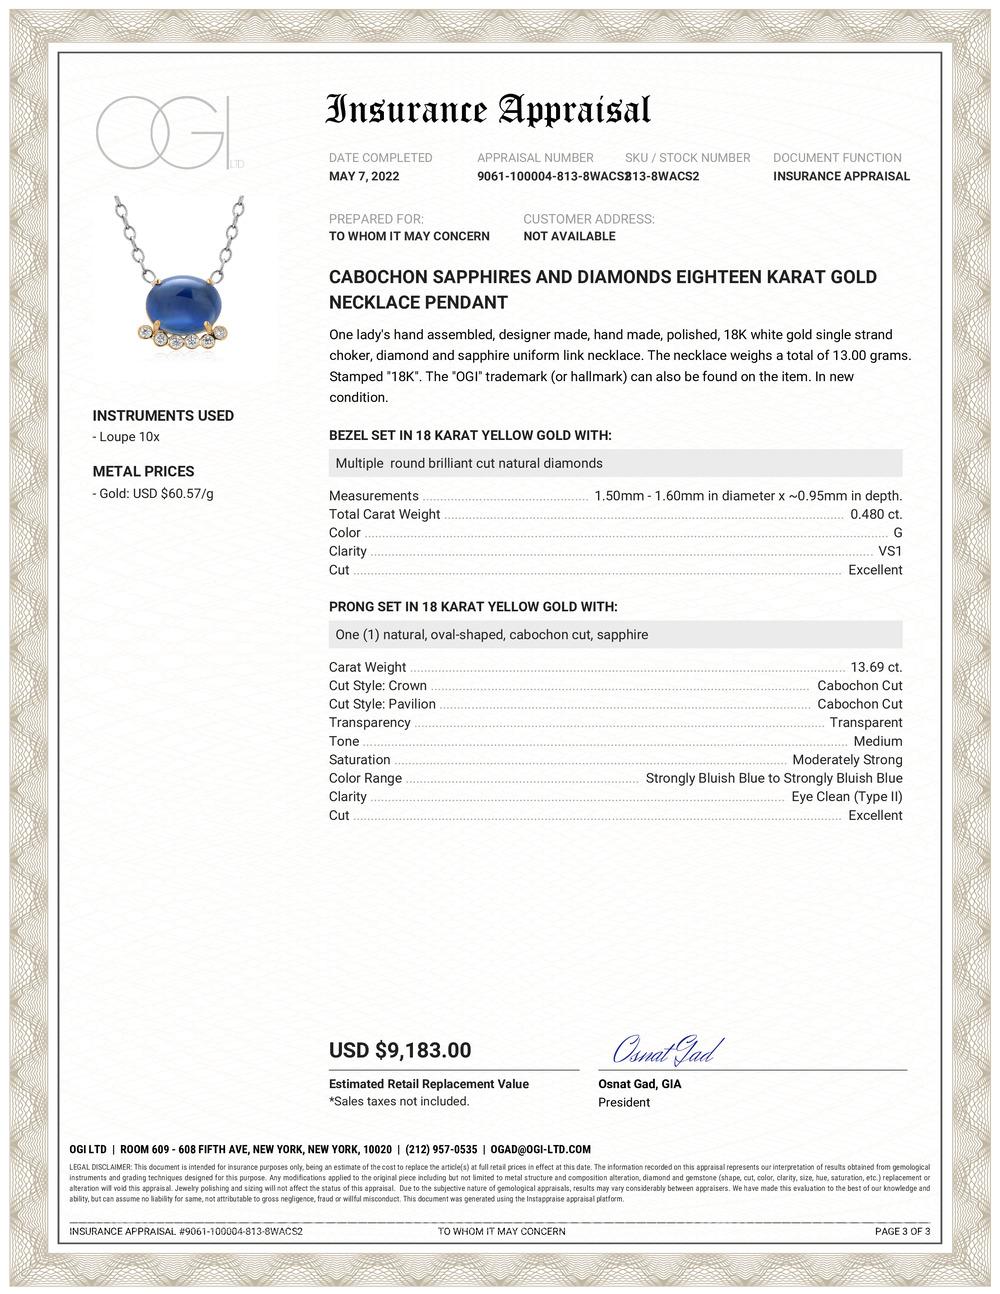 Eighteen karats white and yellow gold necklace pendant 
Pendant measuring 16 inch
Large center Ceylon cabochon ocean blue sapphire weighing 13.69 carat
Six diamond weighing 0.48 carat
Necklace measuring 17